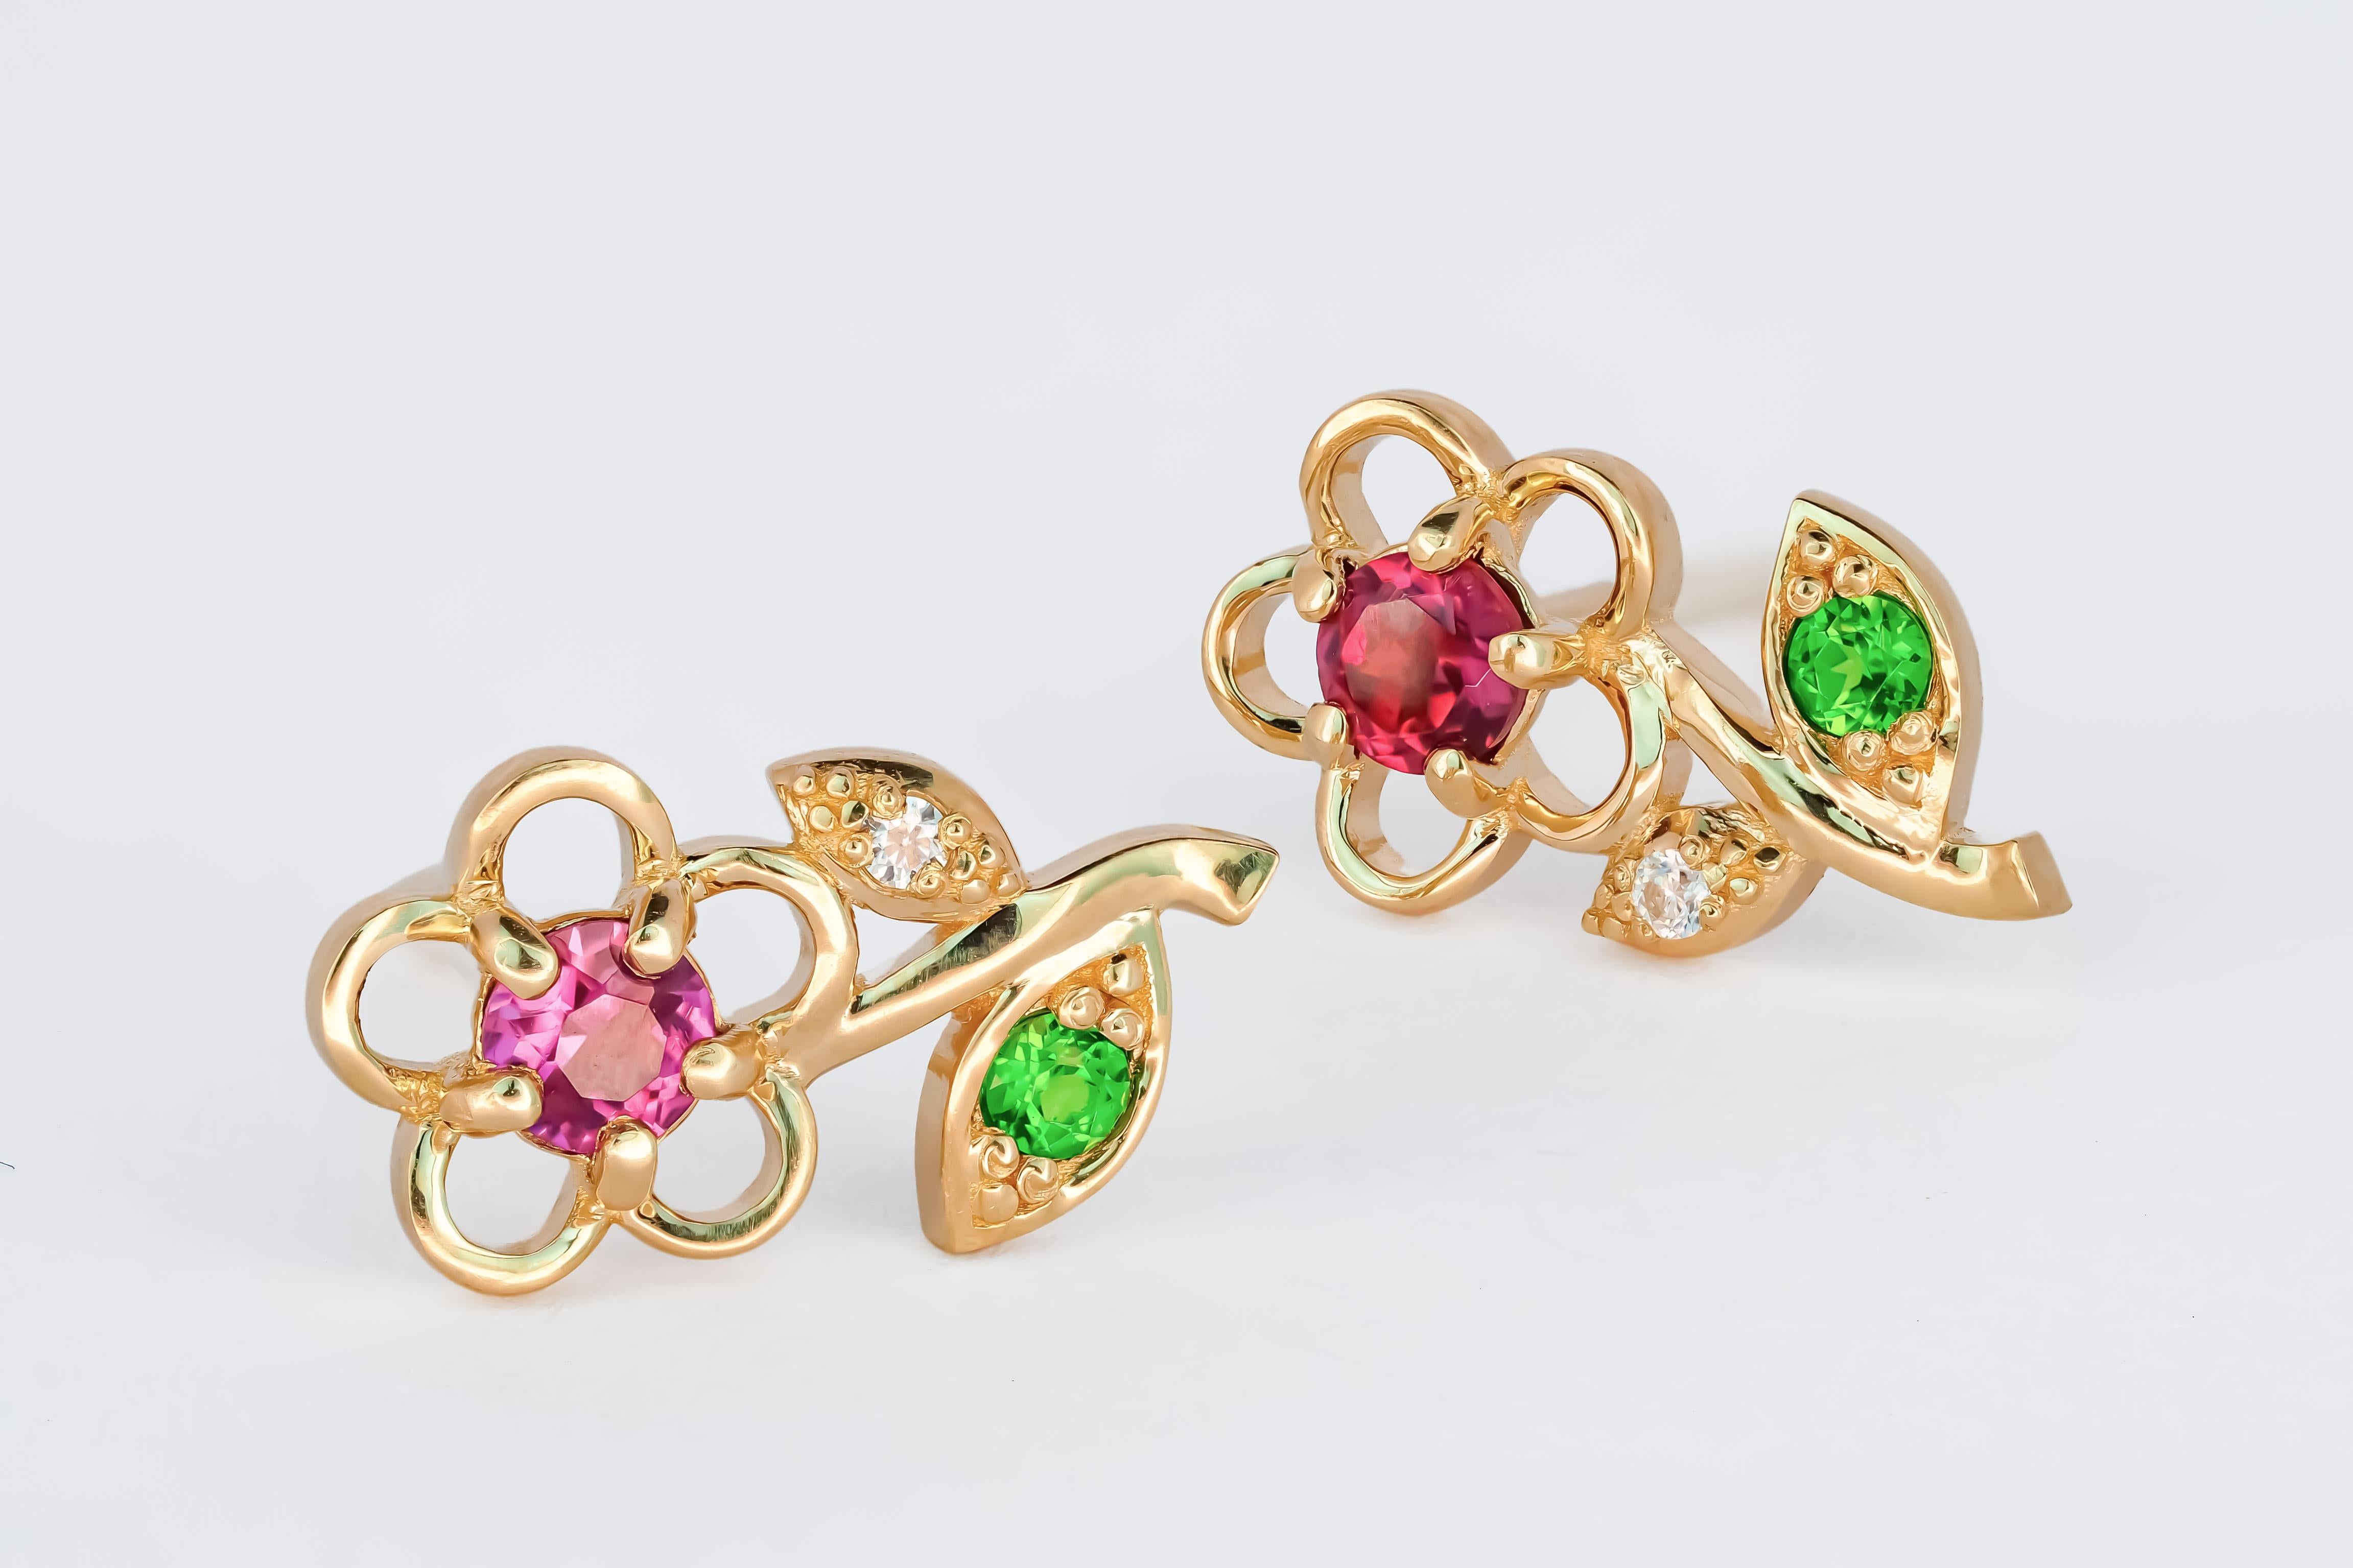 14k Gold Earrings Studs with Garnets, Tsavorites and Diamonds For Sale 2